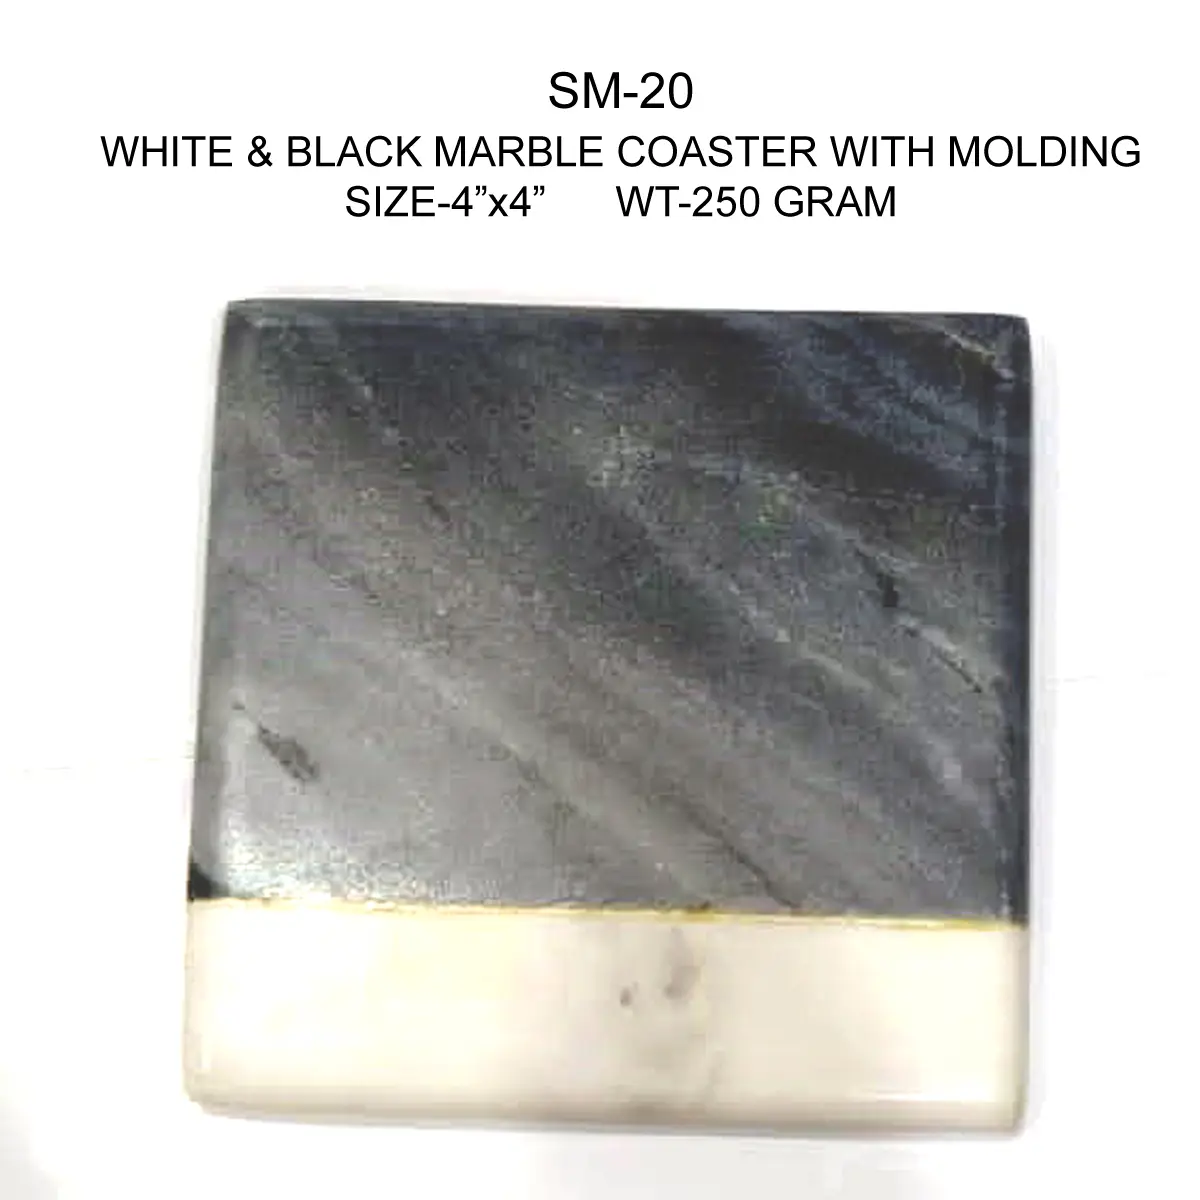 WHITE & BLACK MARBLE COASTER WITH MOLDING